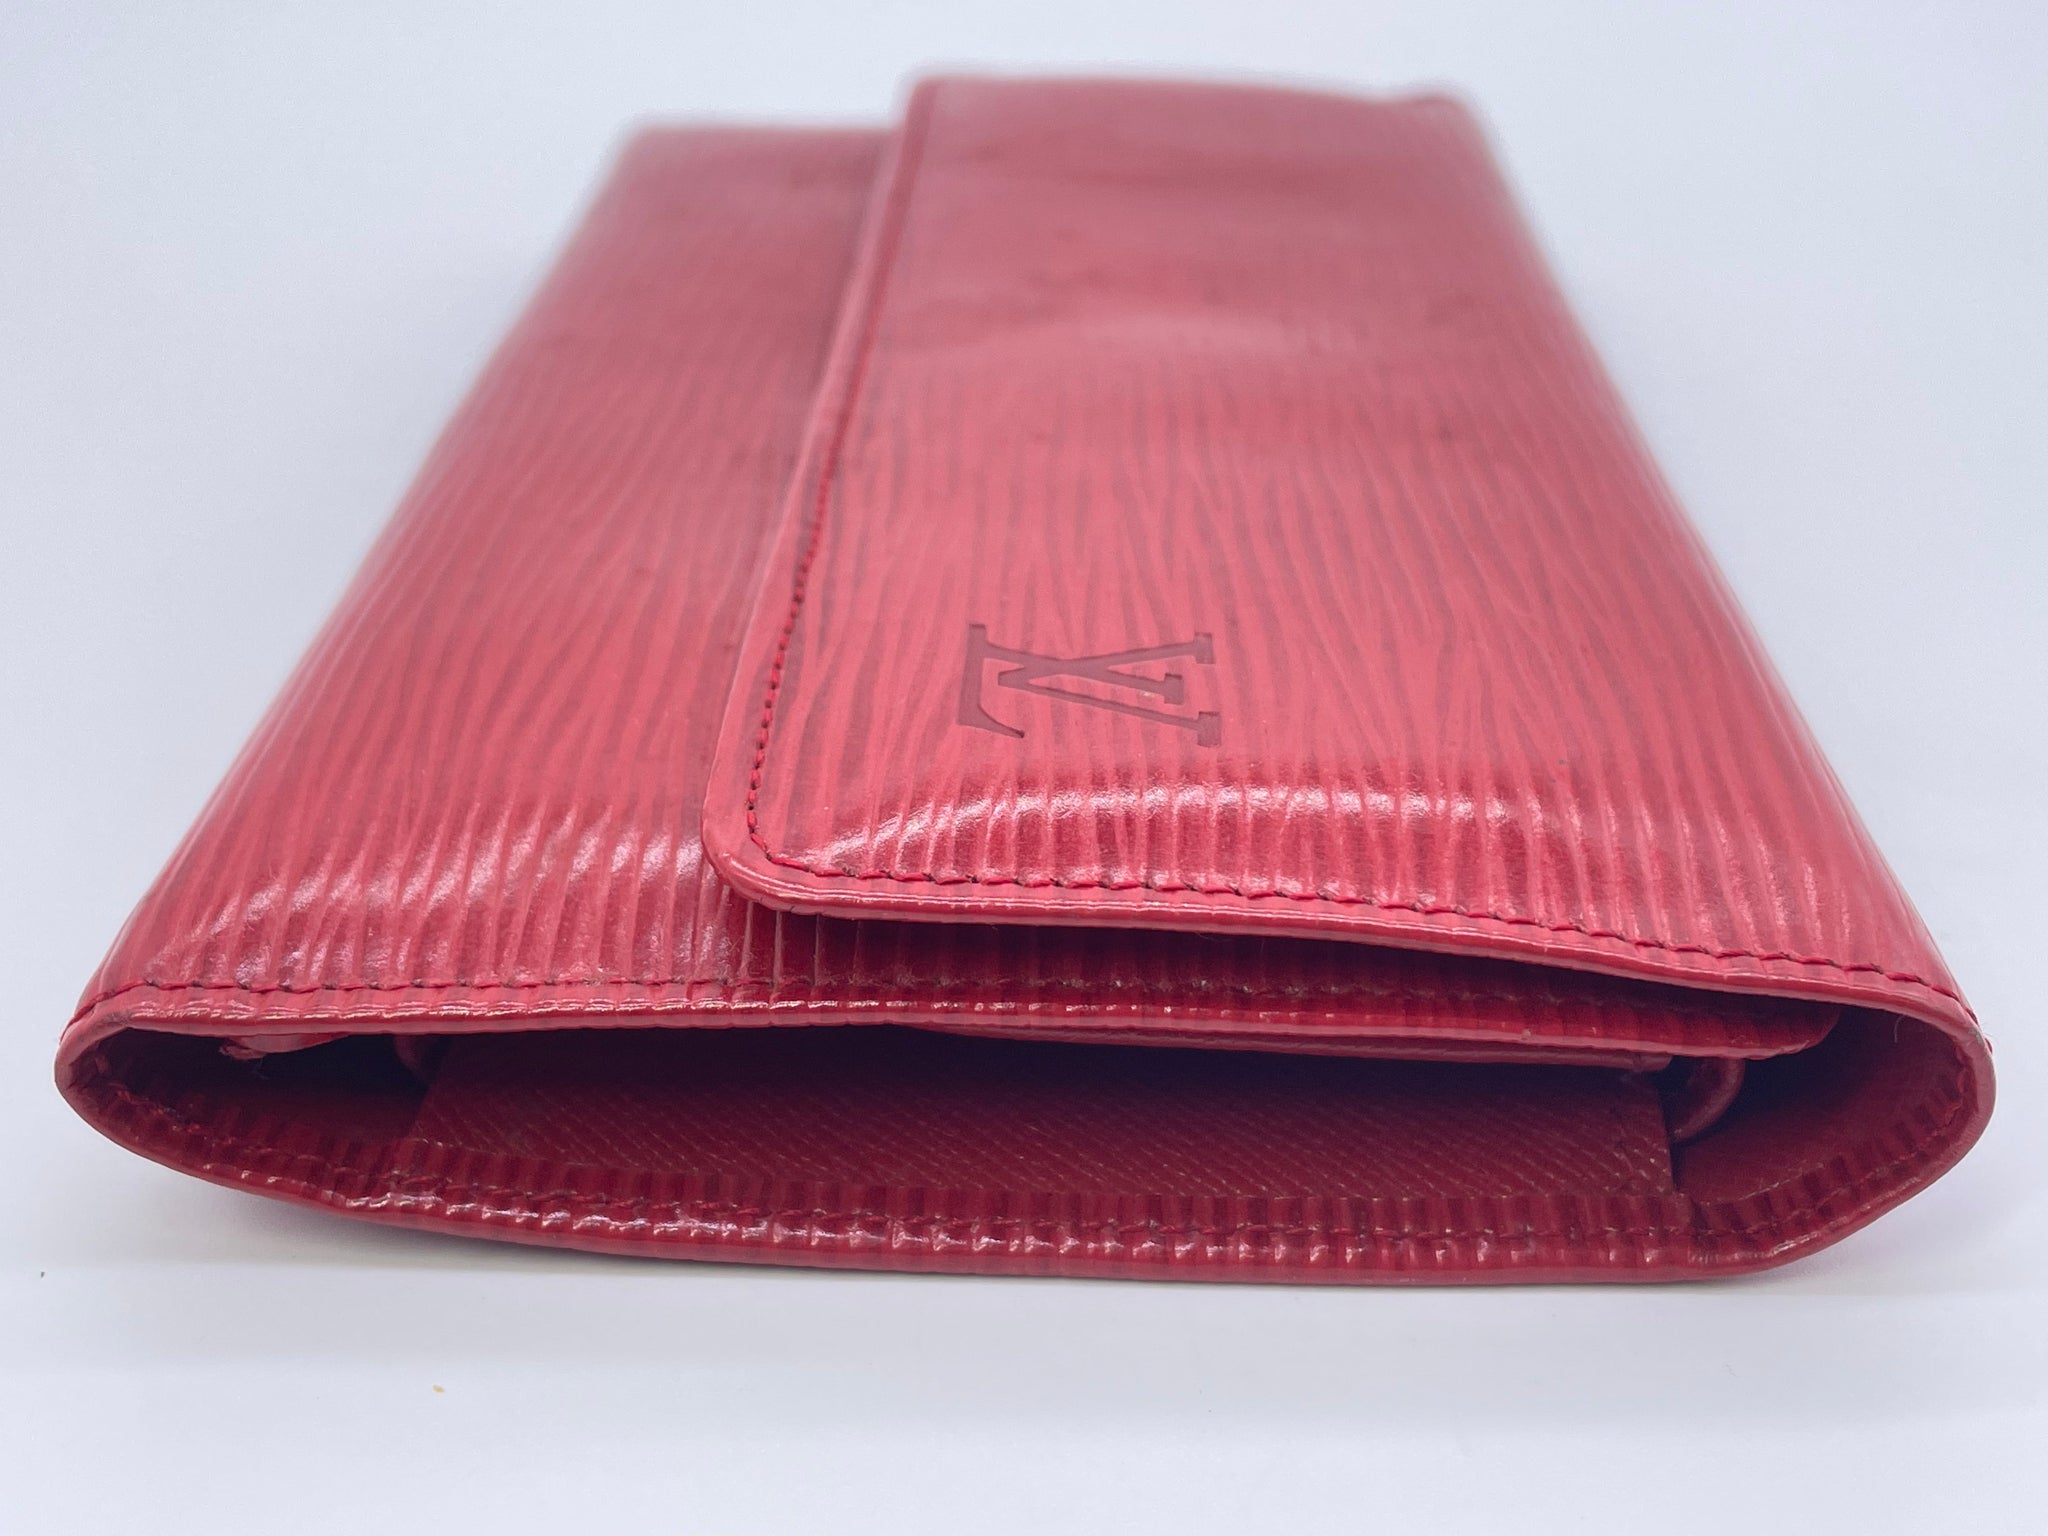 Louis Vuitton Vintage - Epi Louise Long Wallet - Red - Leather and